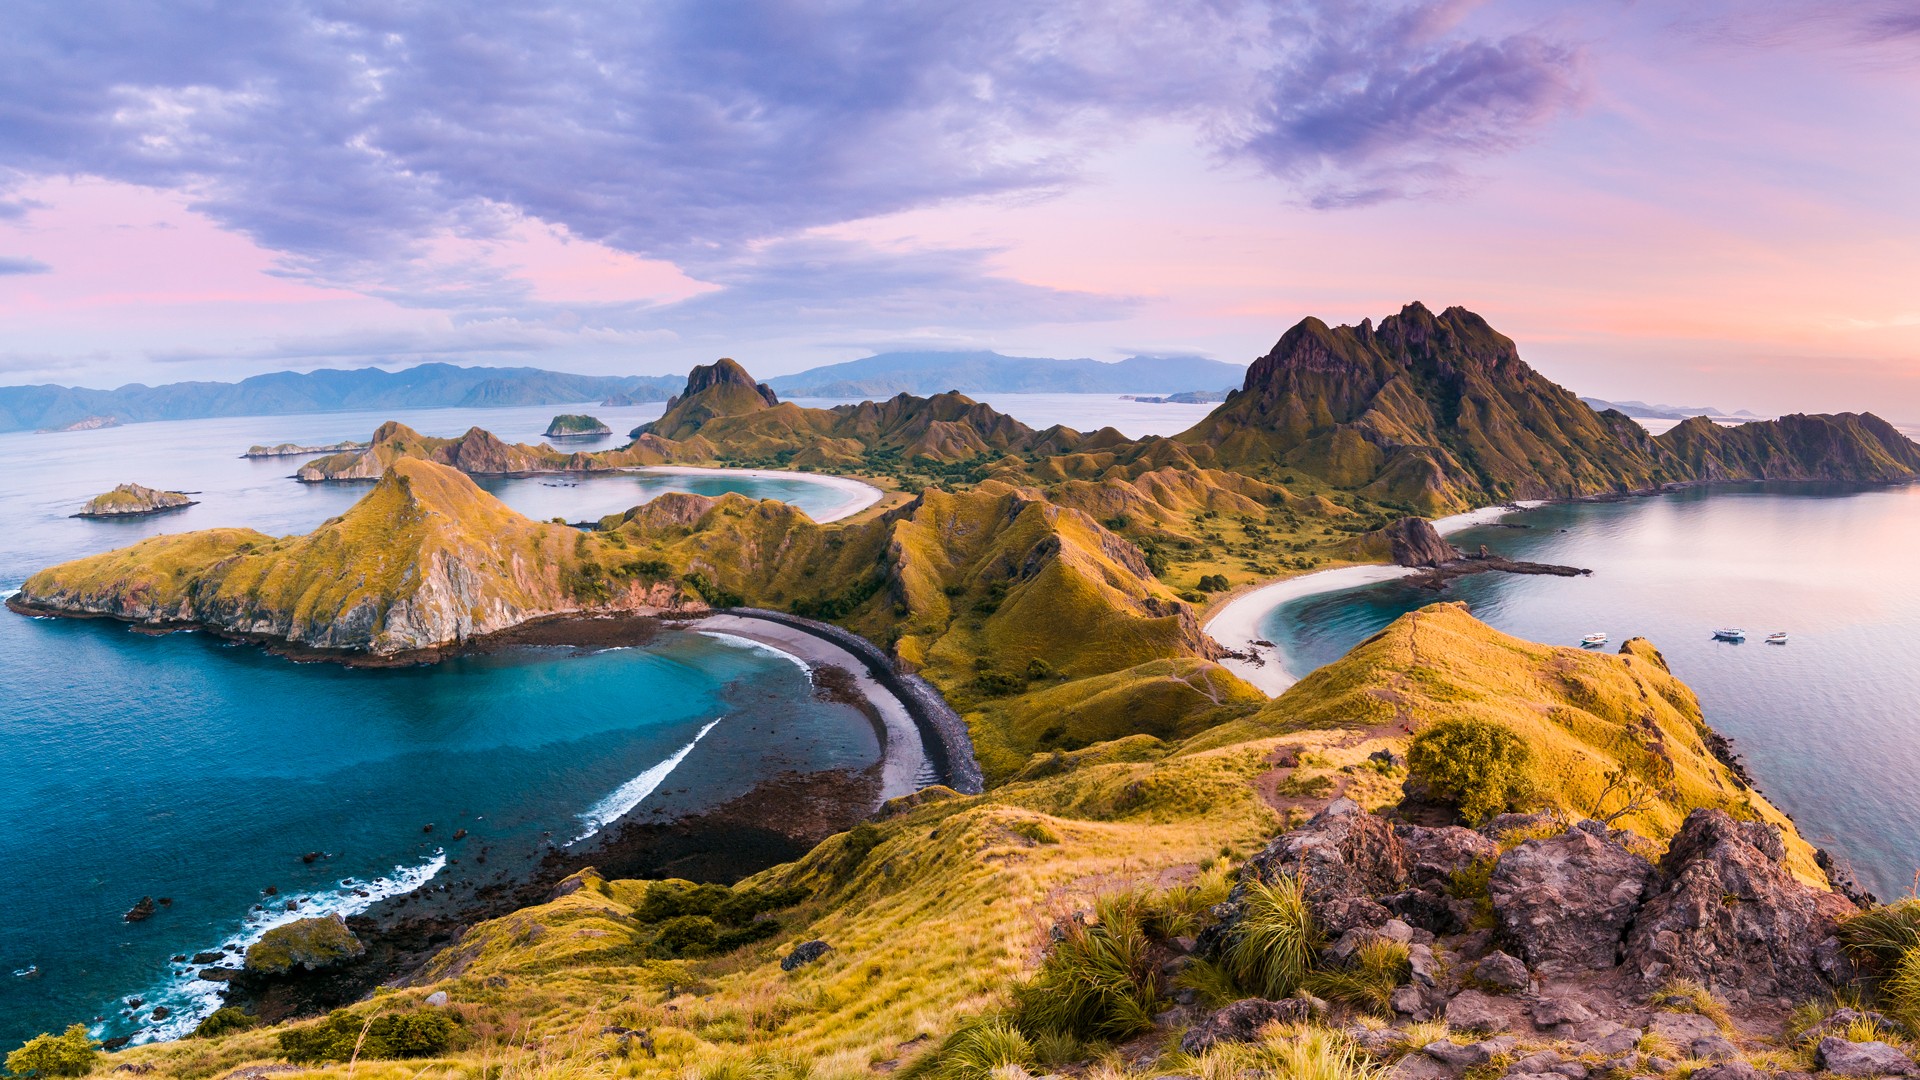 Just Landed Komodo Island is shutting down Escapism TO